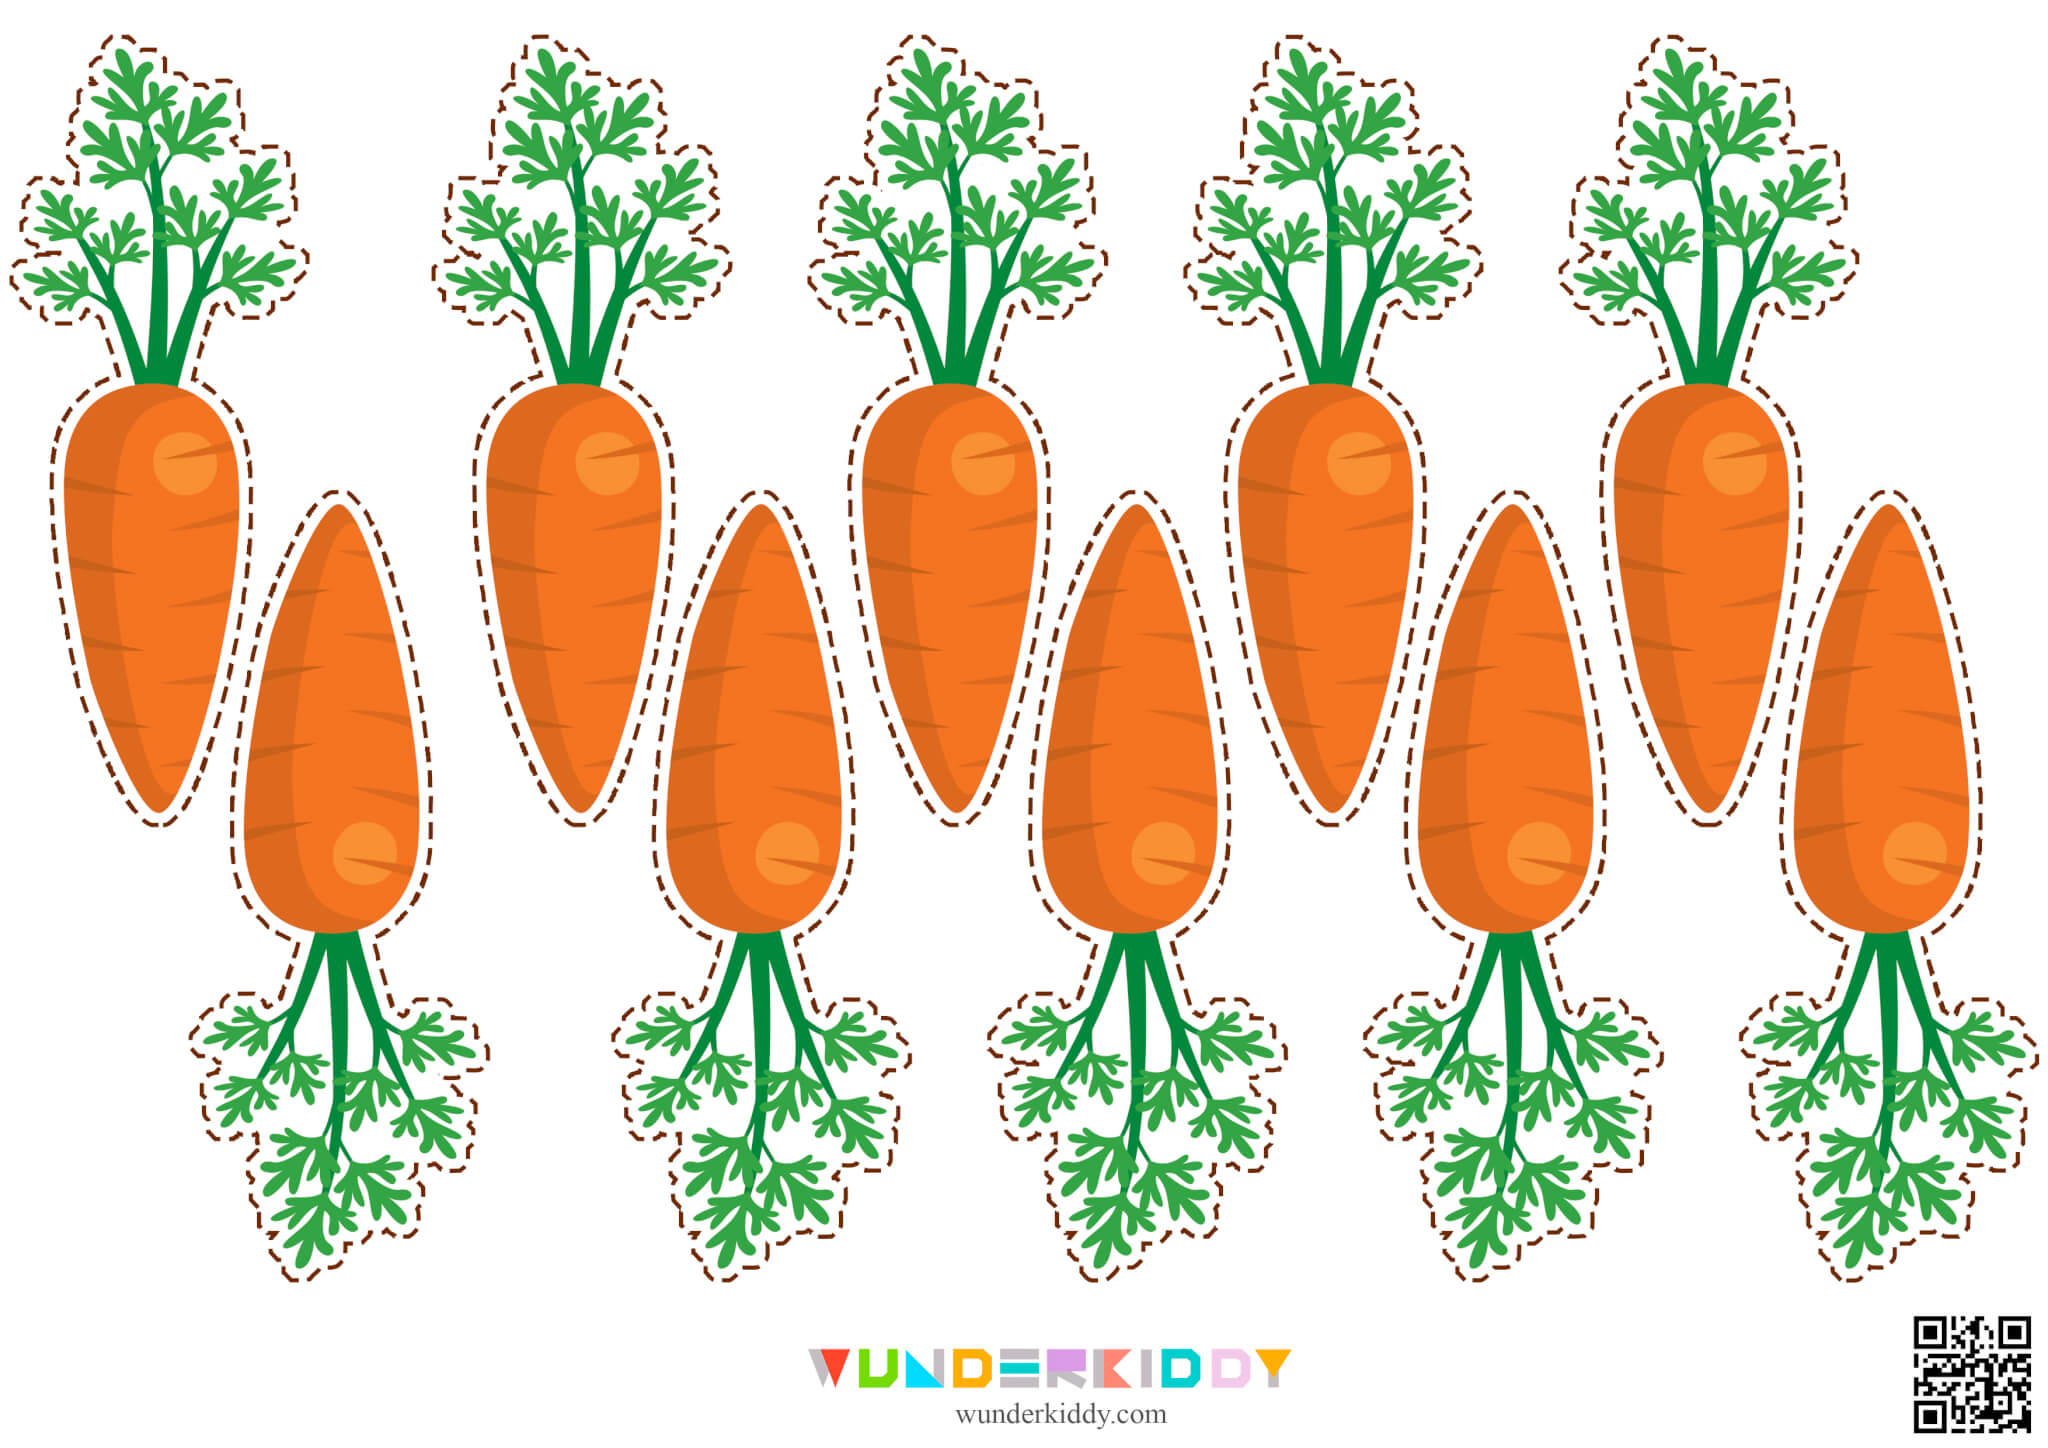 Activity sheet «Bunny and carrot» - Image 4